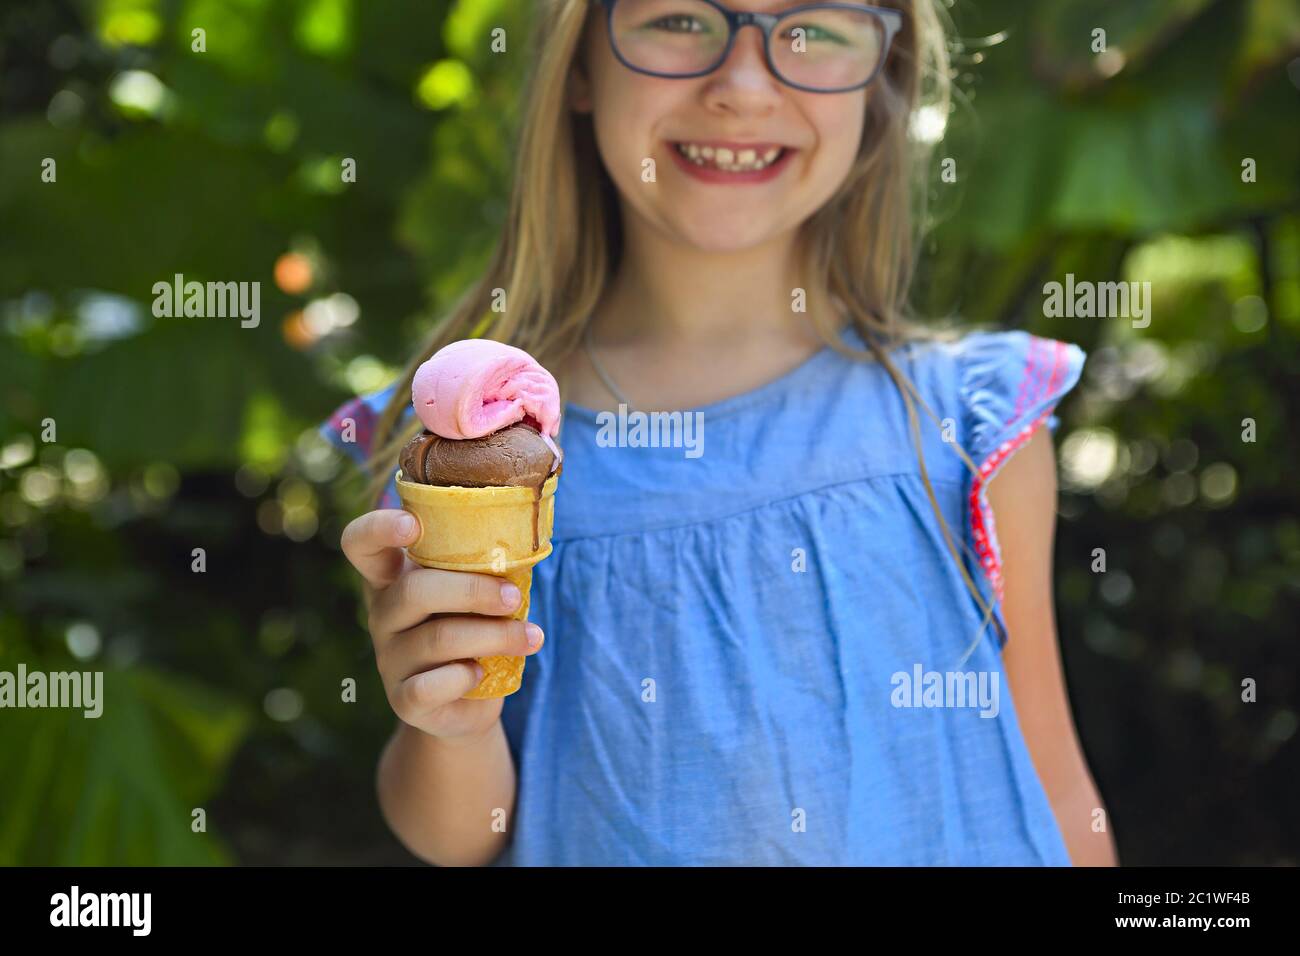 Cute little girl with funny expression holding ice cream cone outside against bright nature background Stock Photo